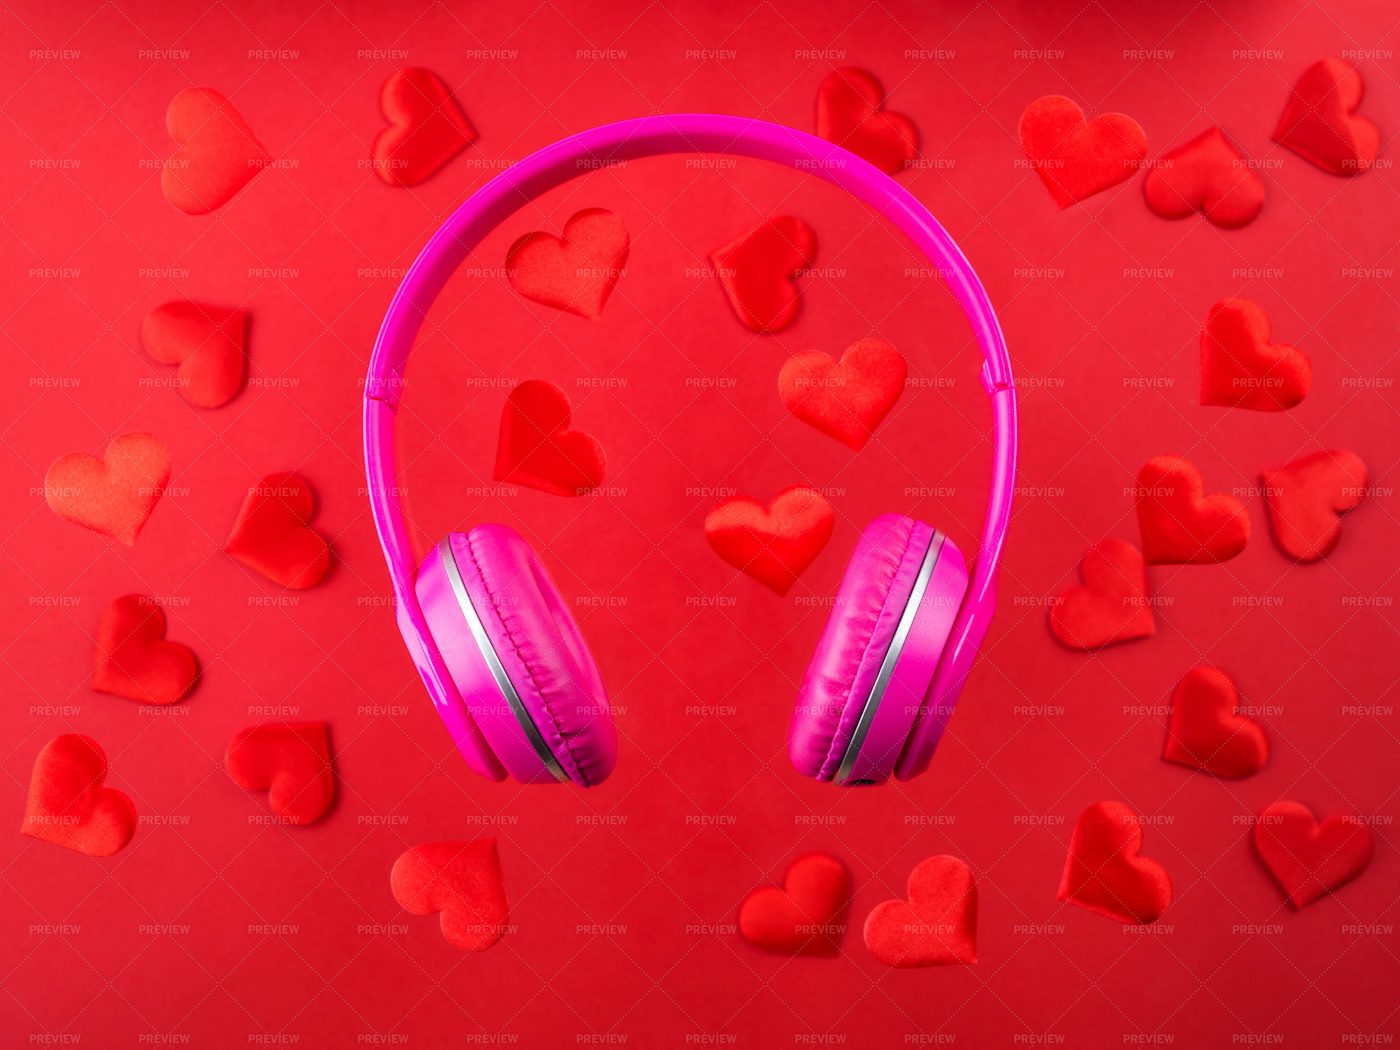 Pink Headphones On Red: Stock Photos